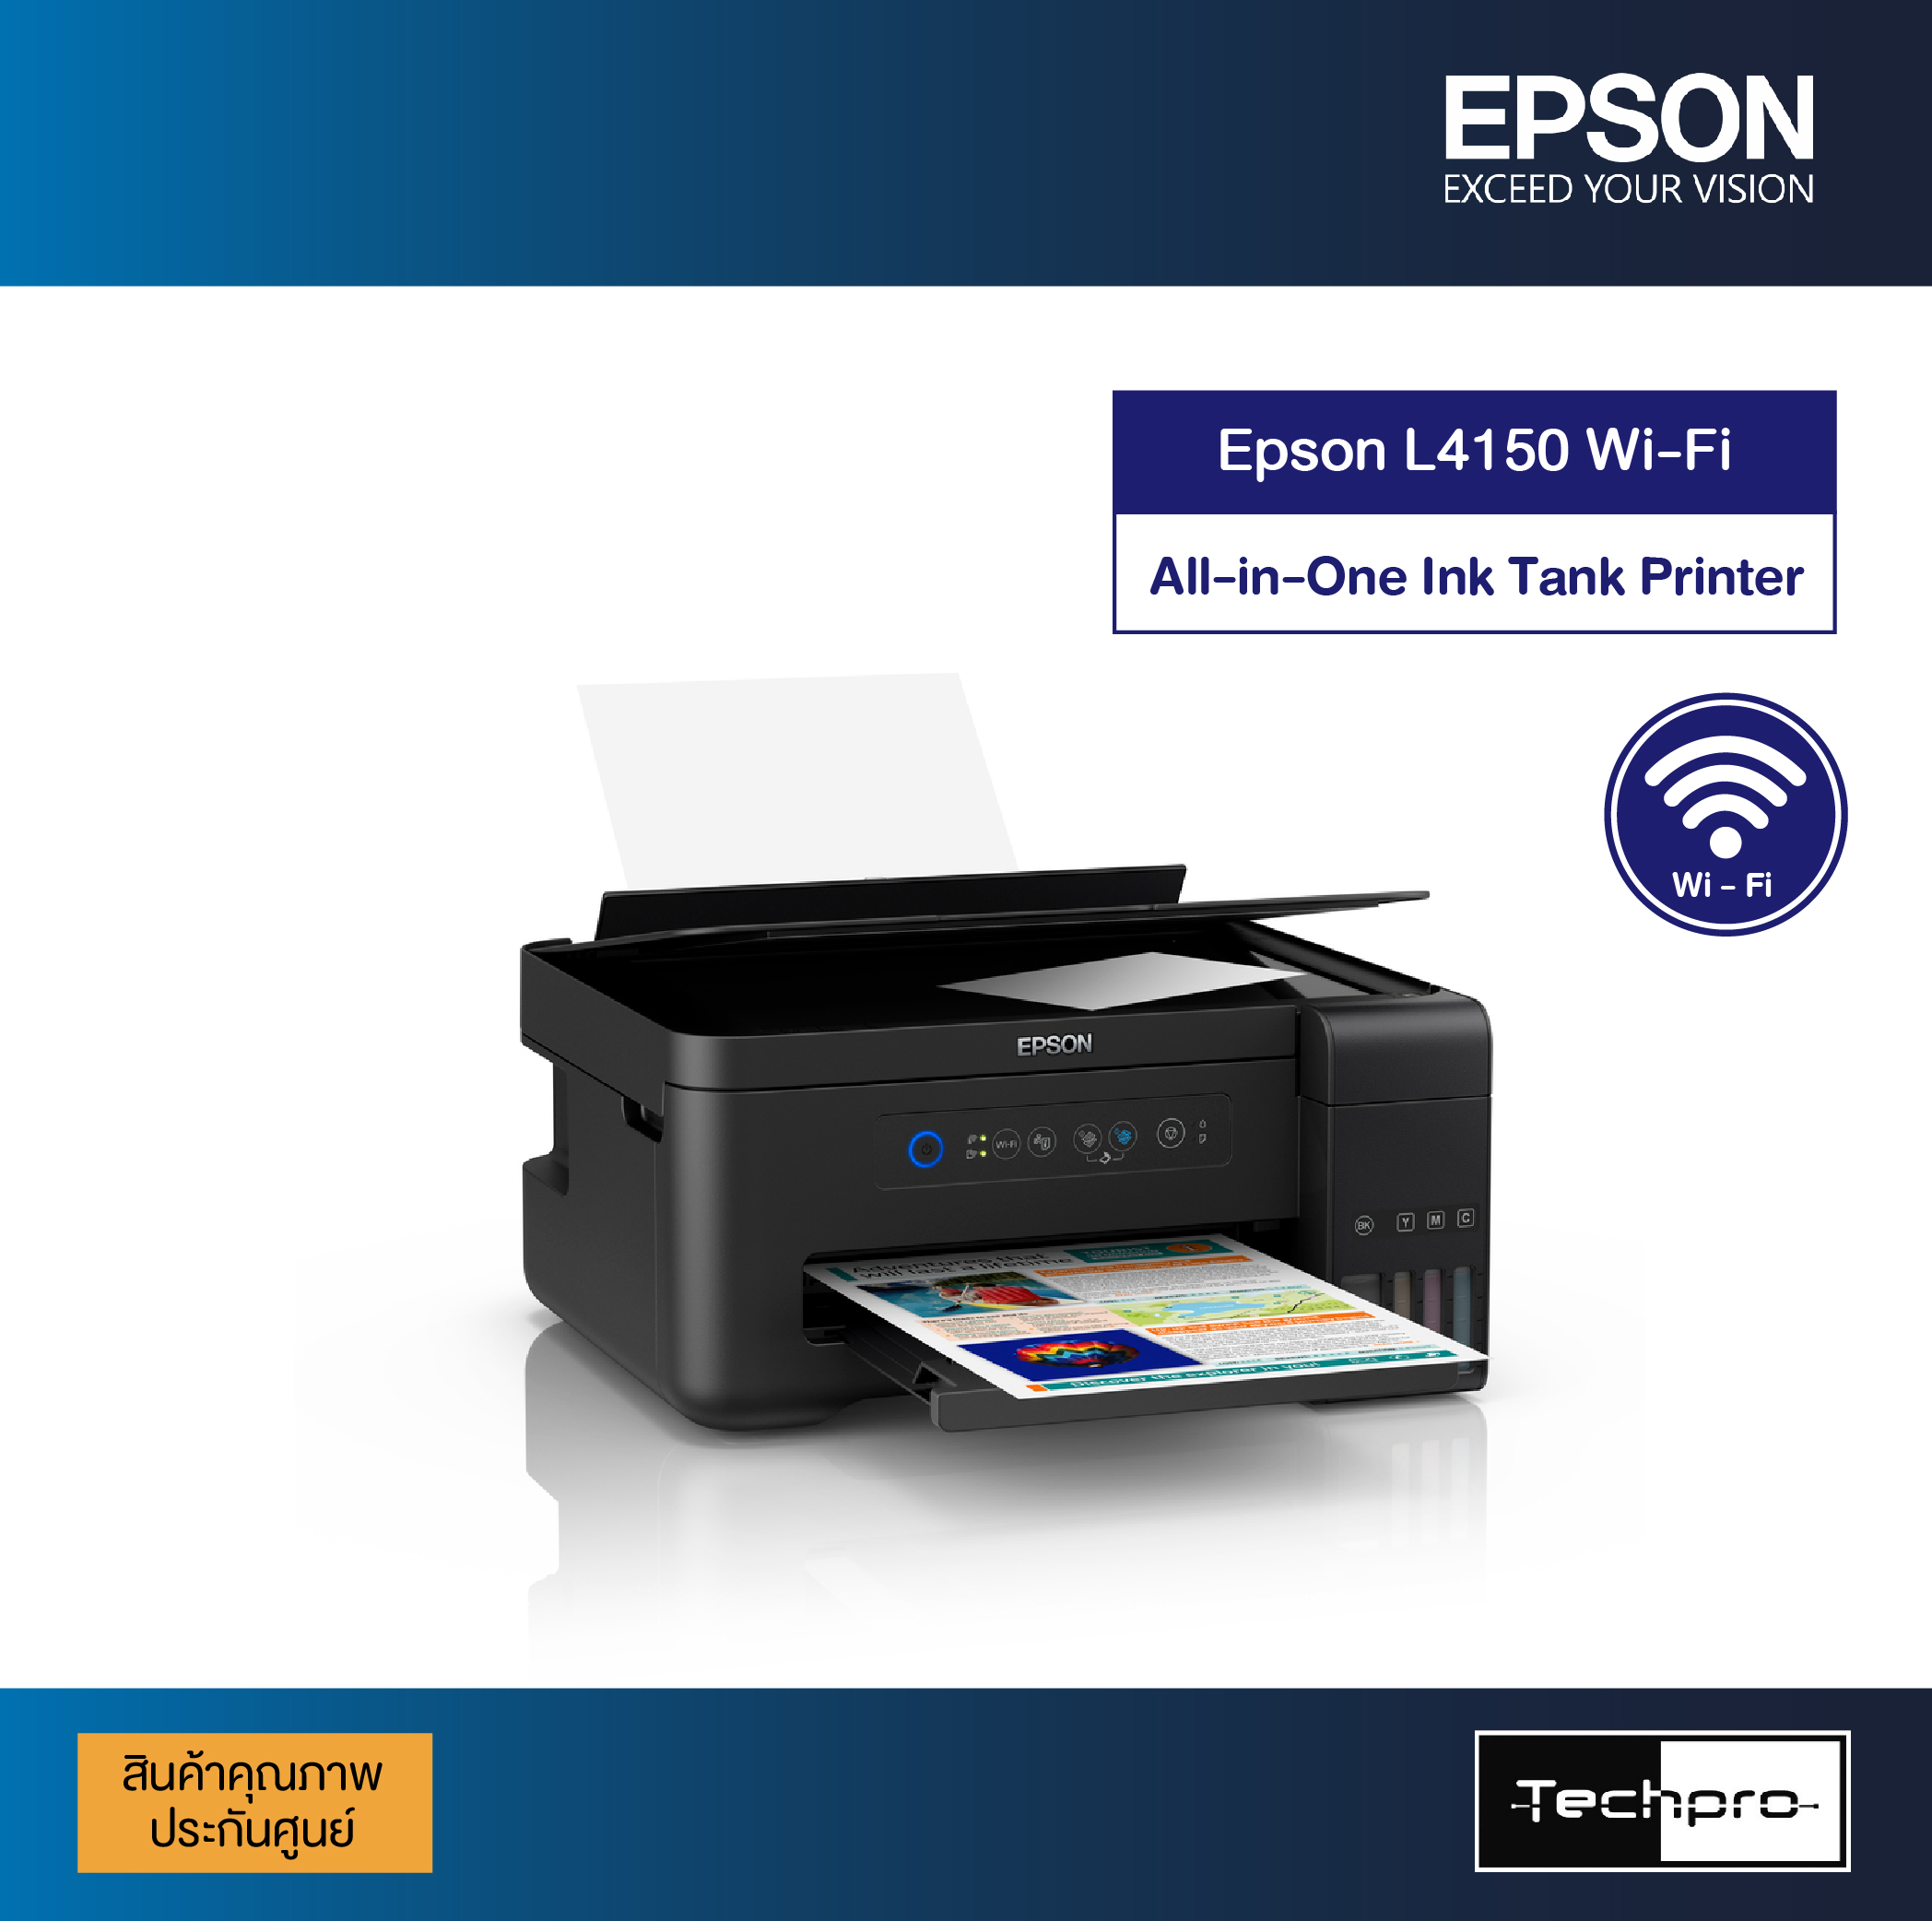 Epson L4150 Wi Fi All In One Ink Tank Printer Techpro 9076 Hot Sexy Girl 9337